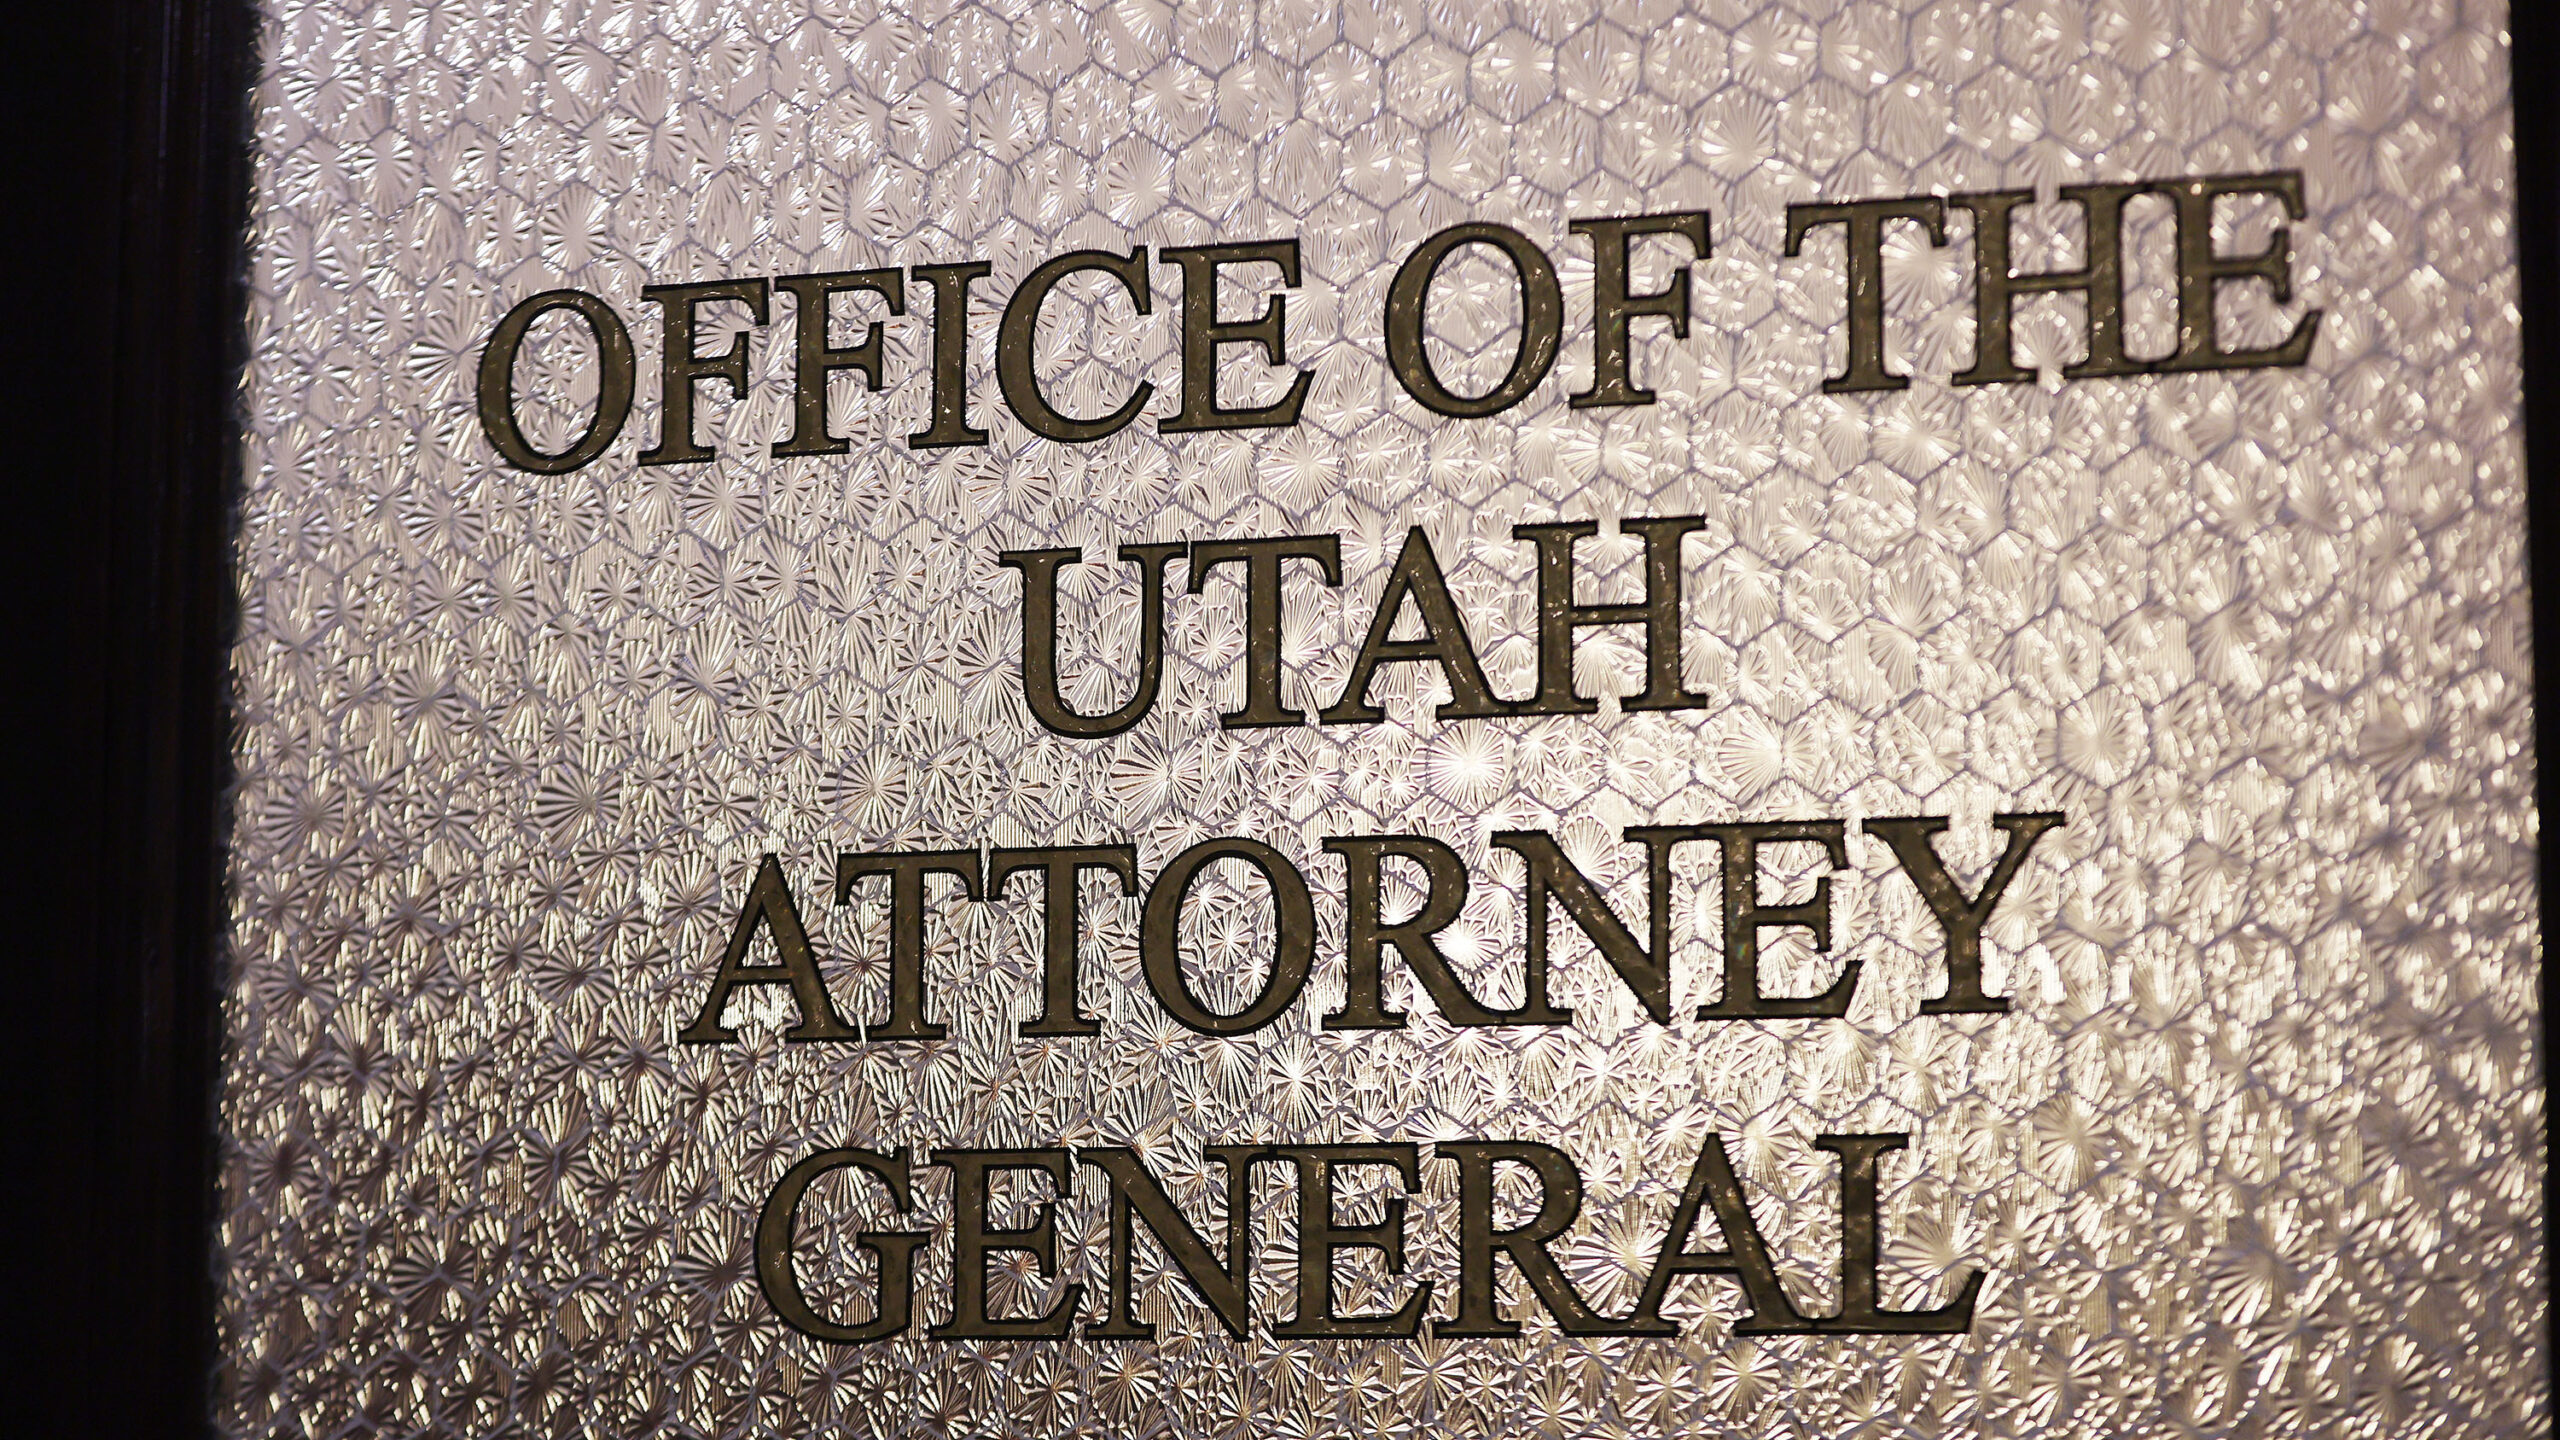 Utah's Attorney General has sent a letter to the federal government claiming climate investing, or ...